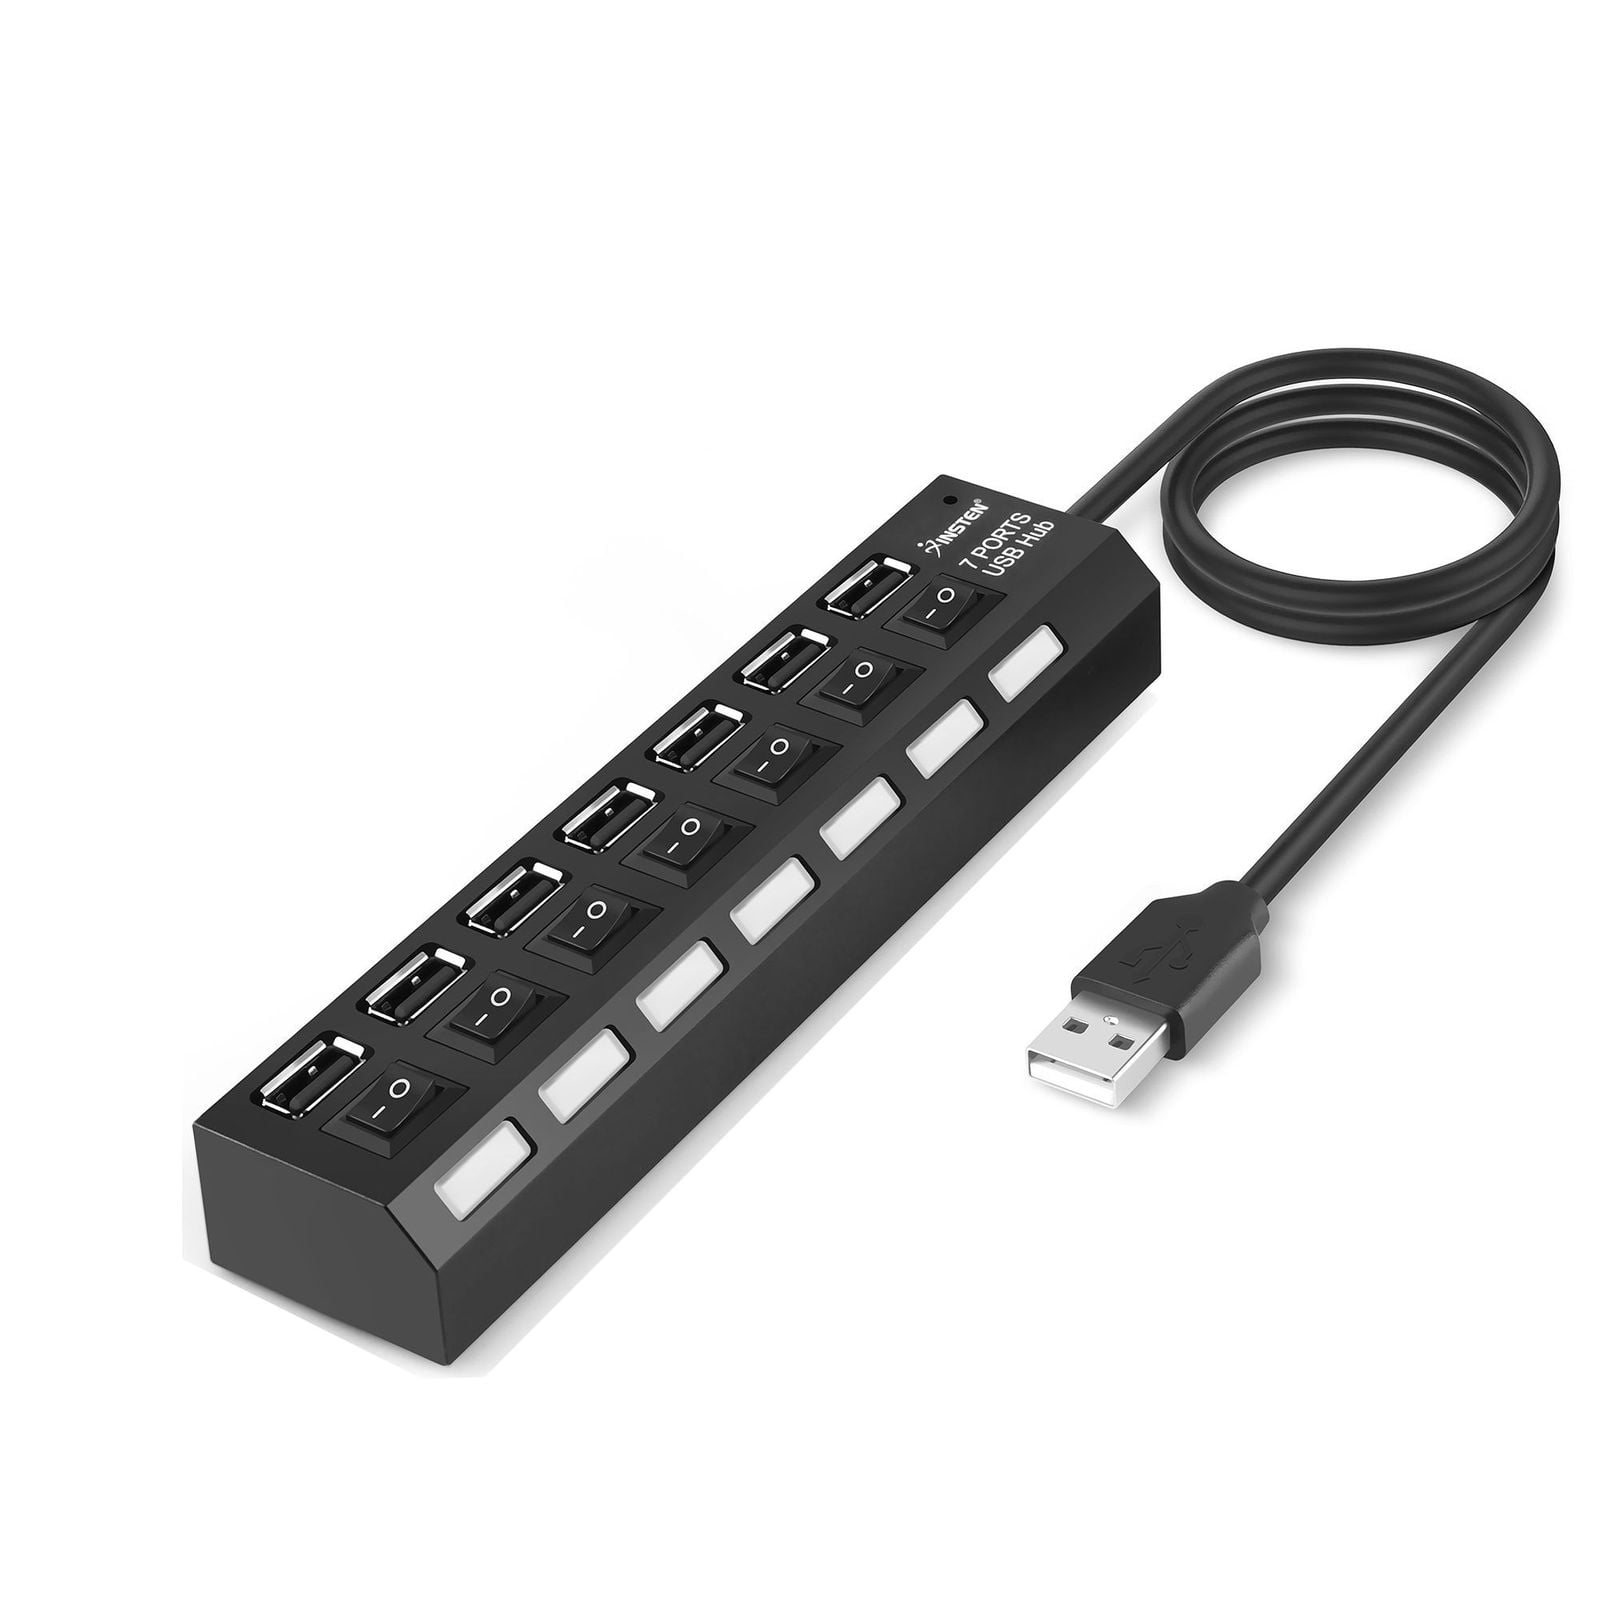 Portable 7 Ports USB Cable 2.0 Hub USB Cable2, Linux, PC or MAC